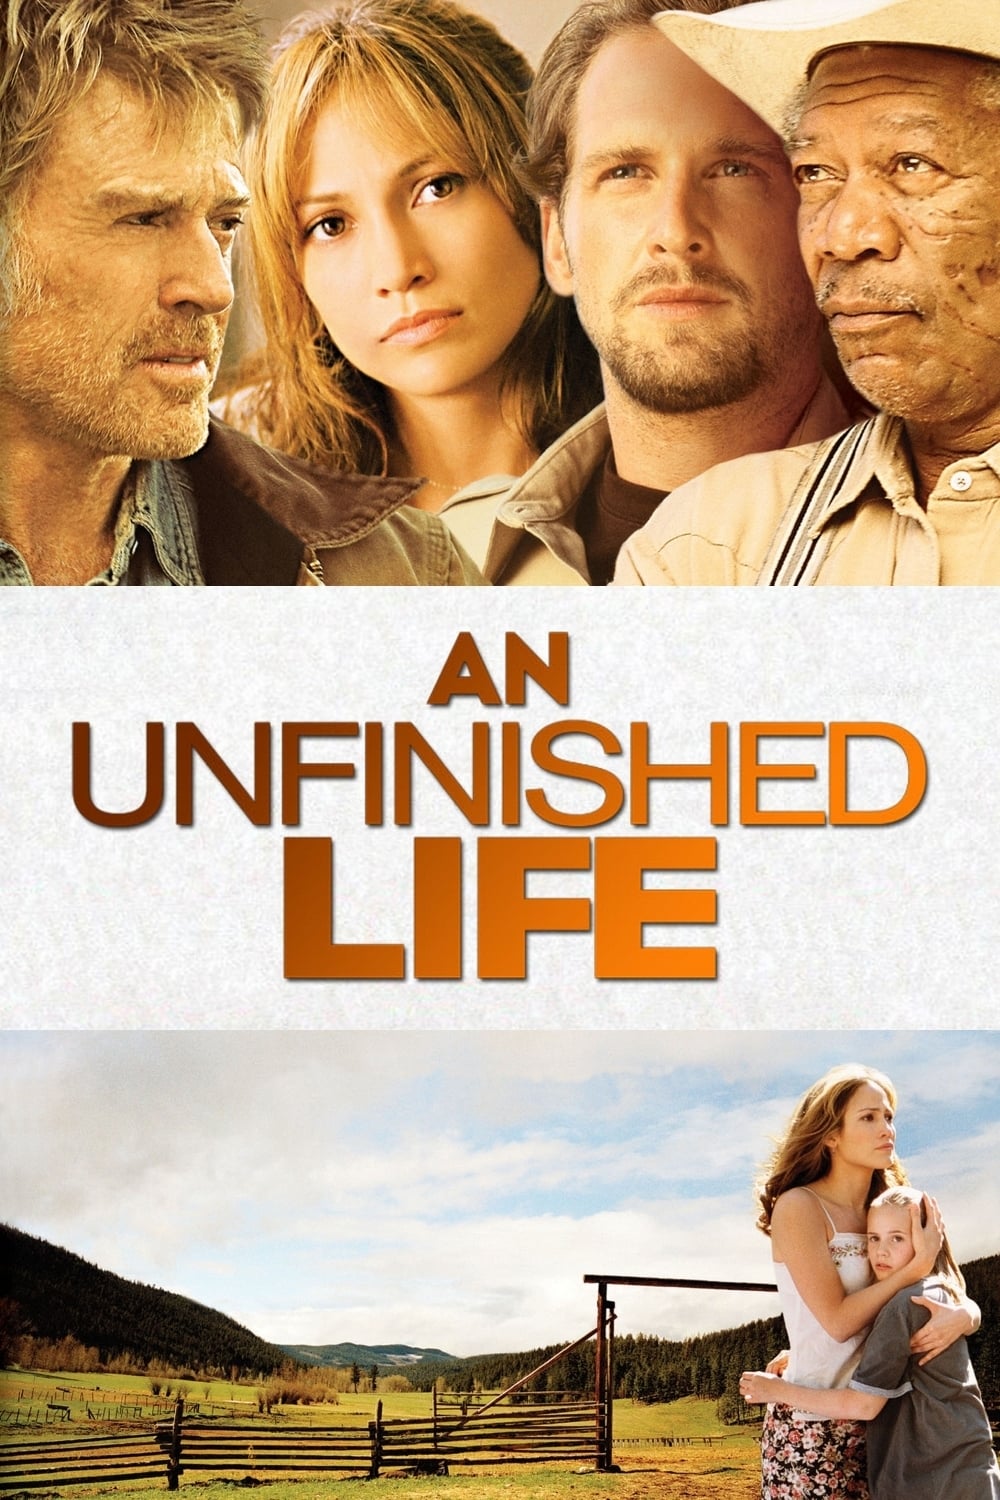 Cuộc Sống Dở Dang - An Unfinished Life (2005)